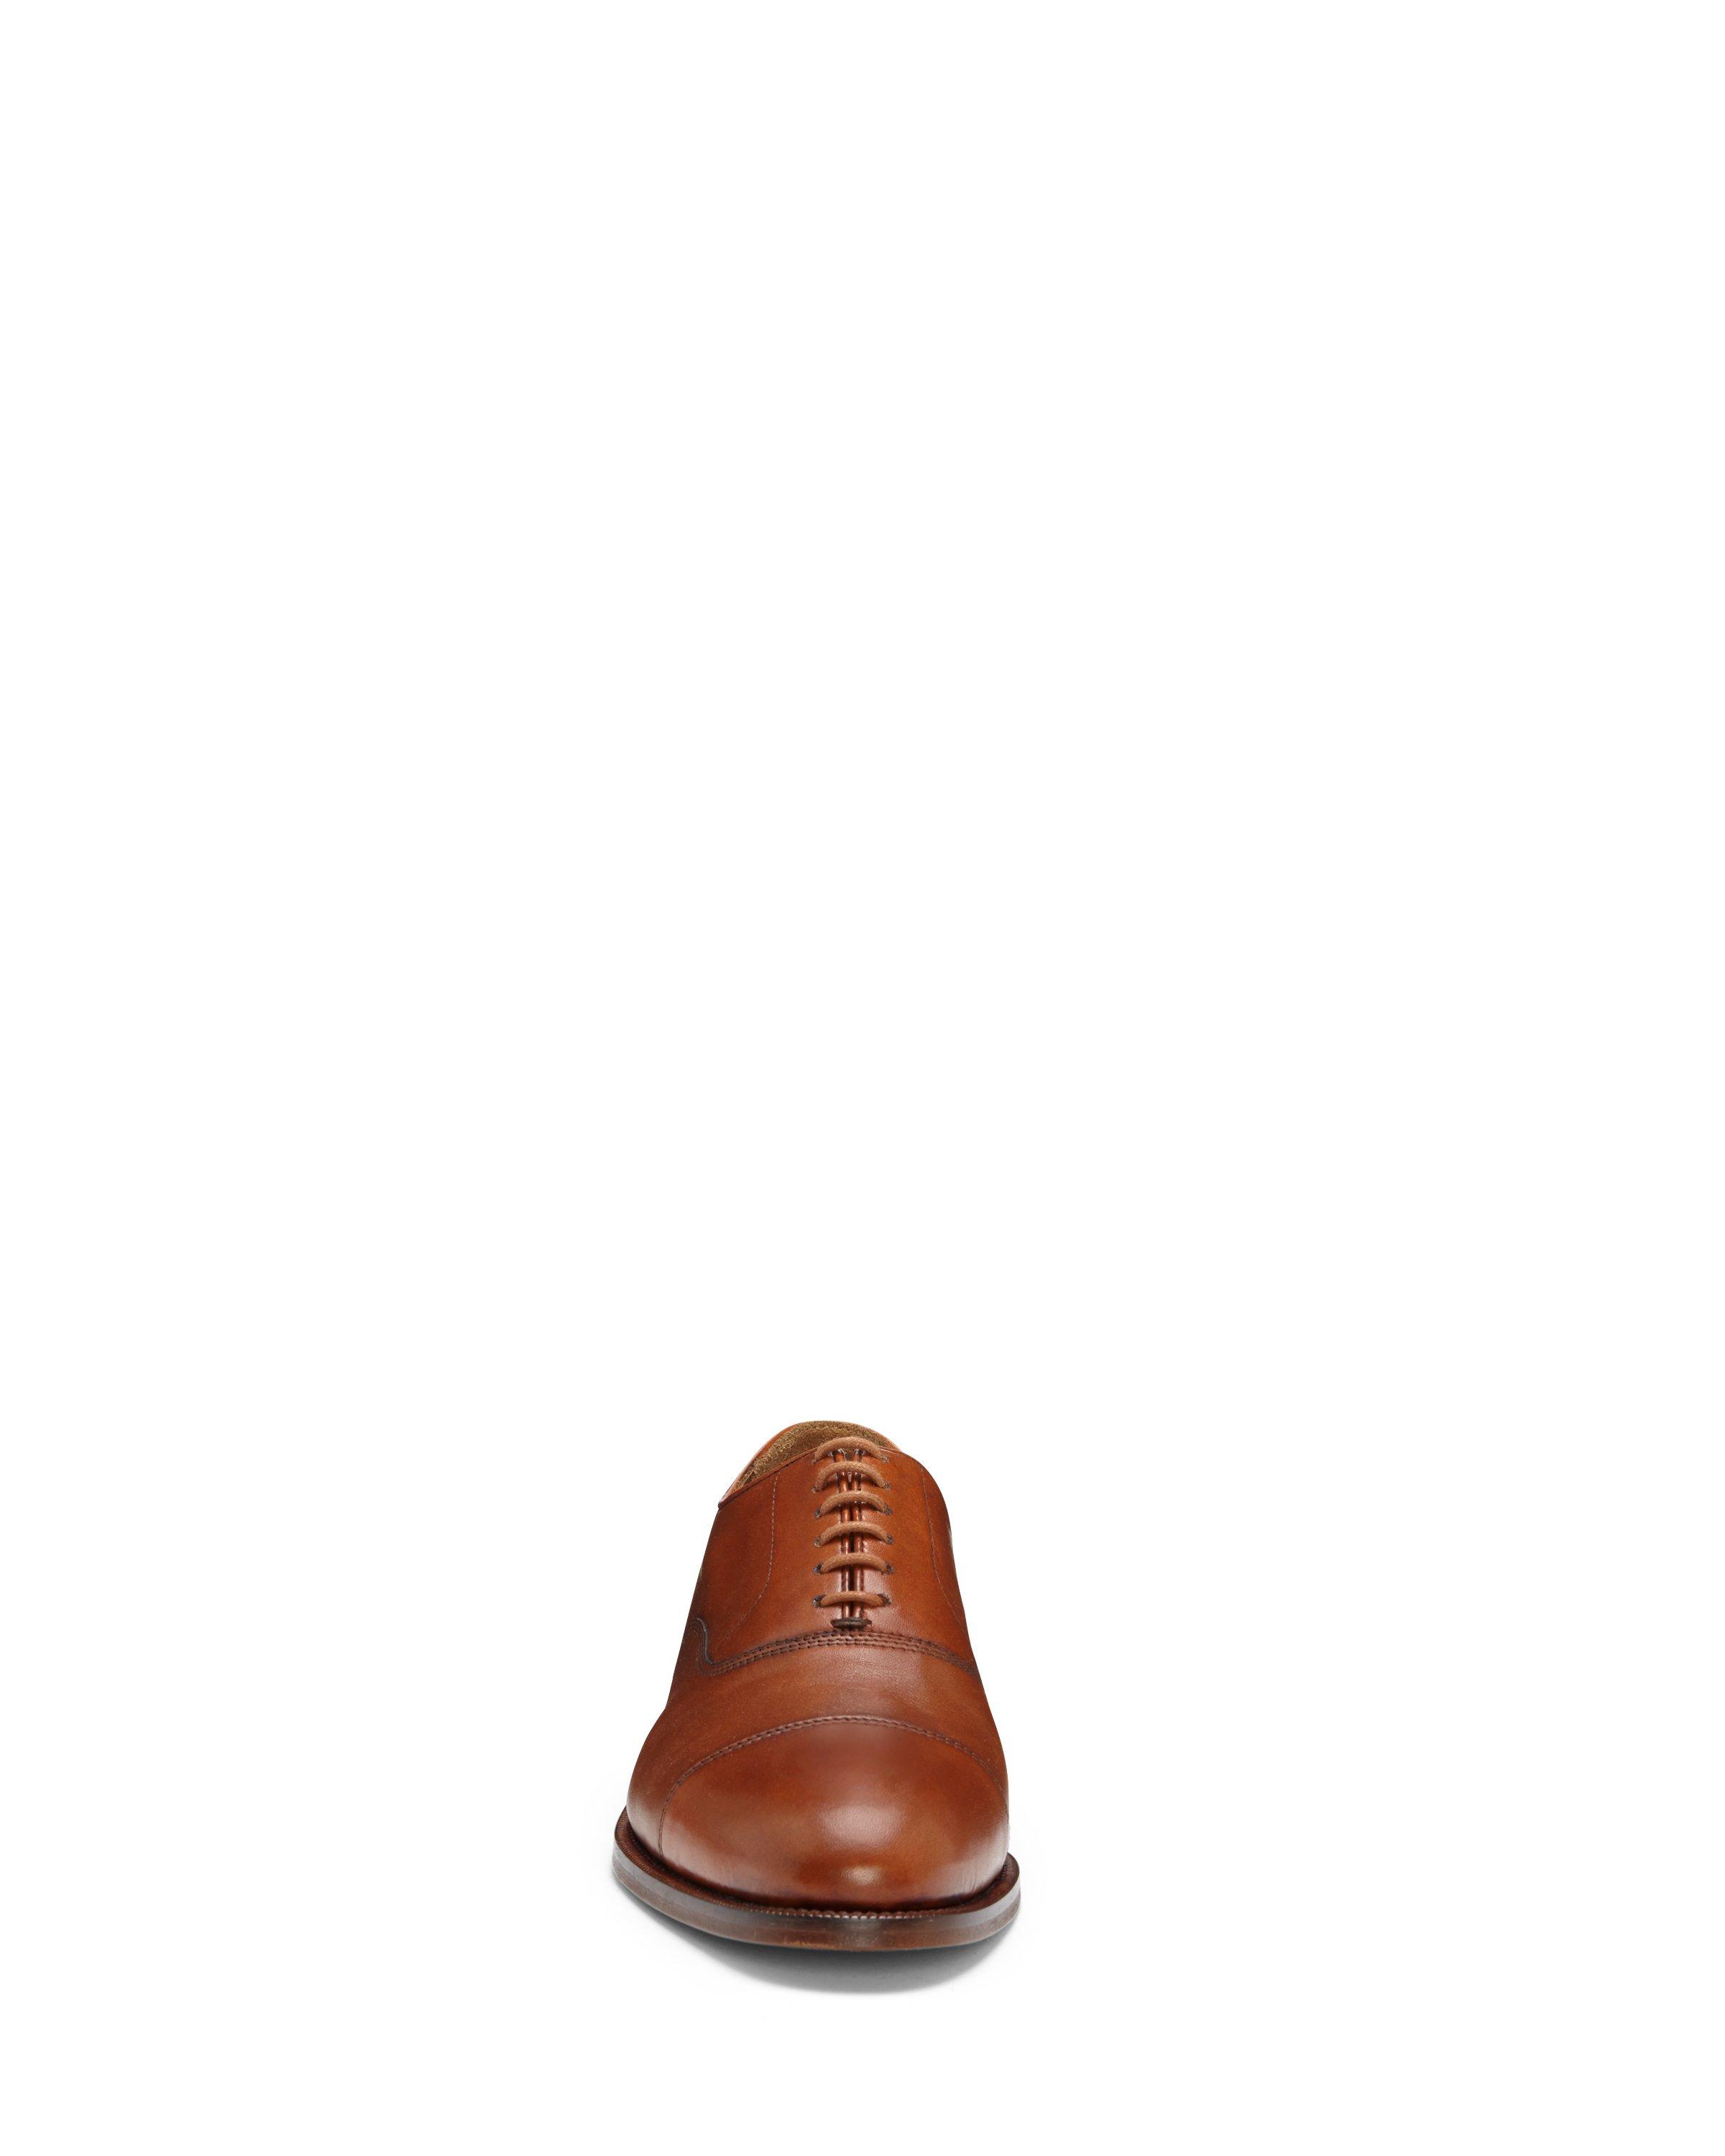 Vince Camuto Eeric - Cap-toe Oxford in 